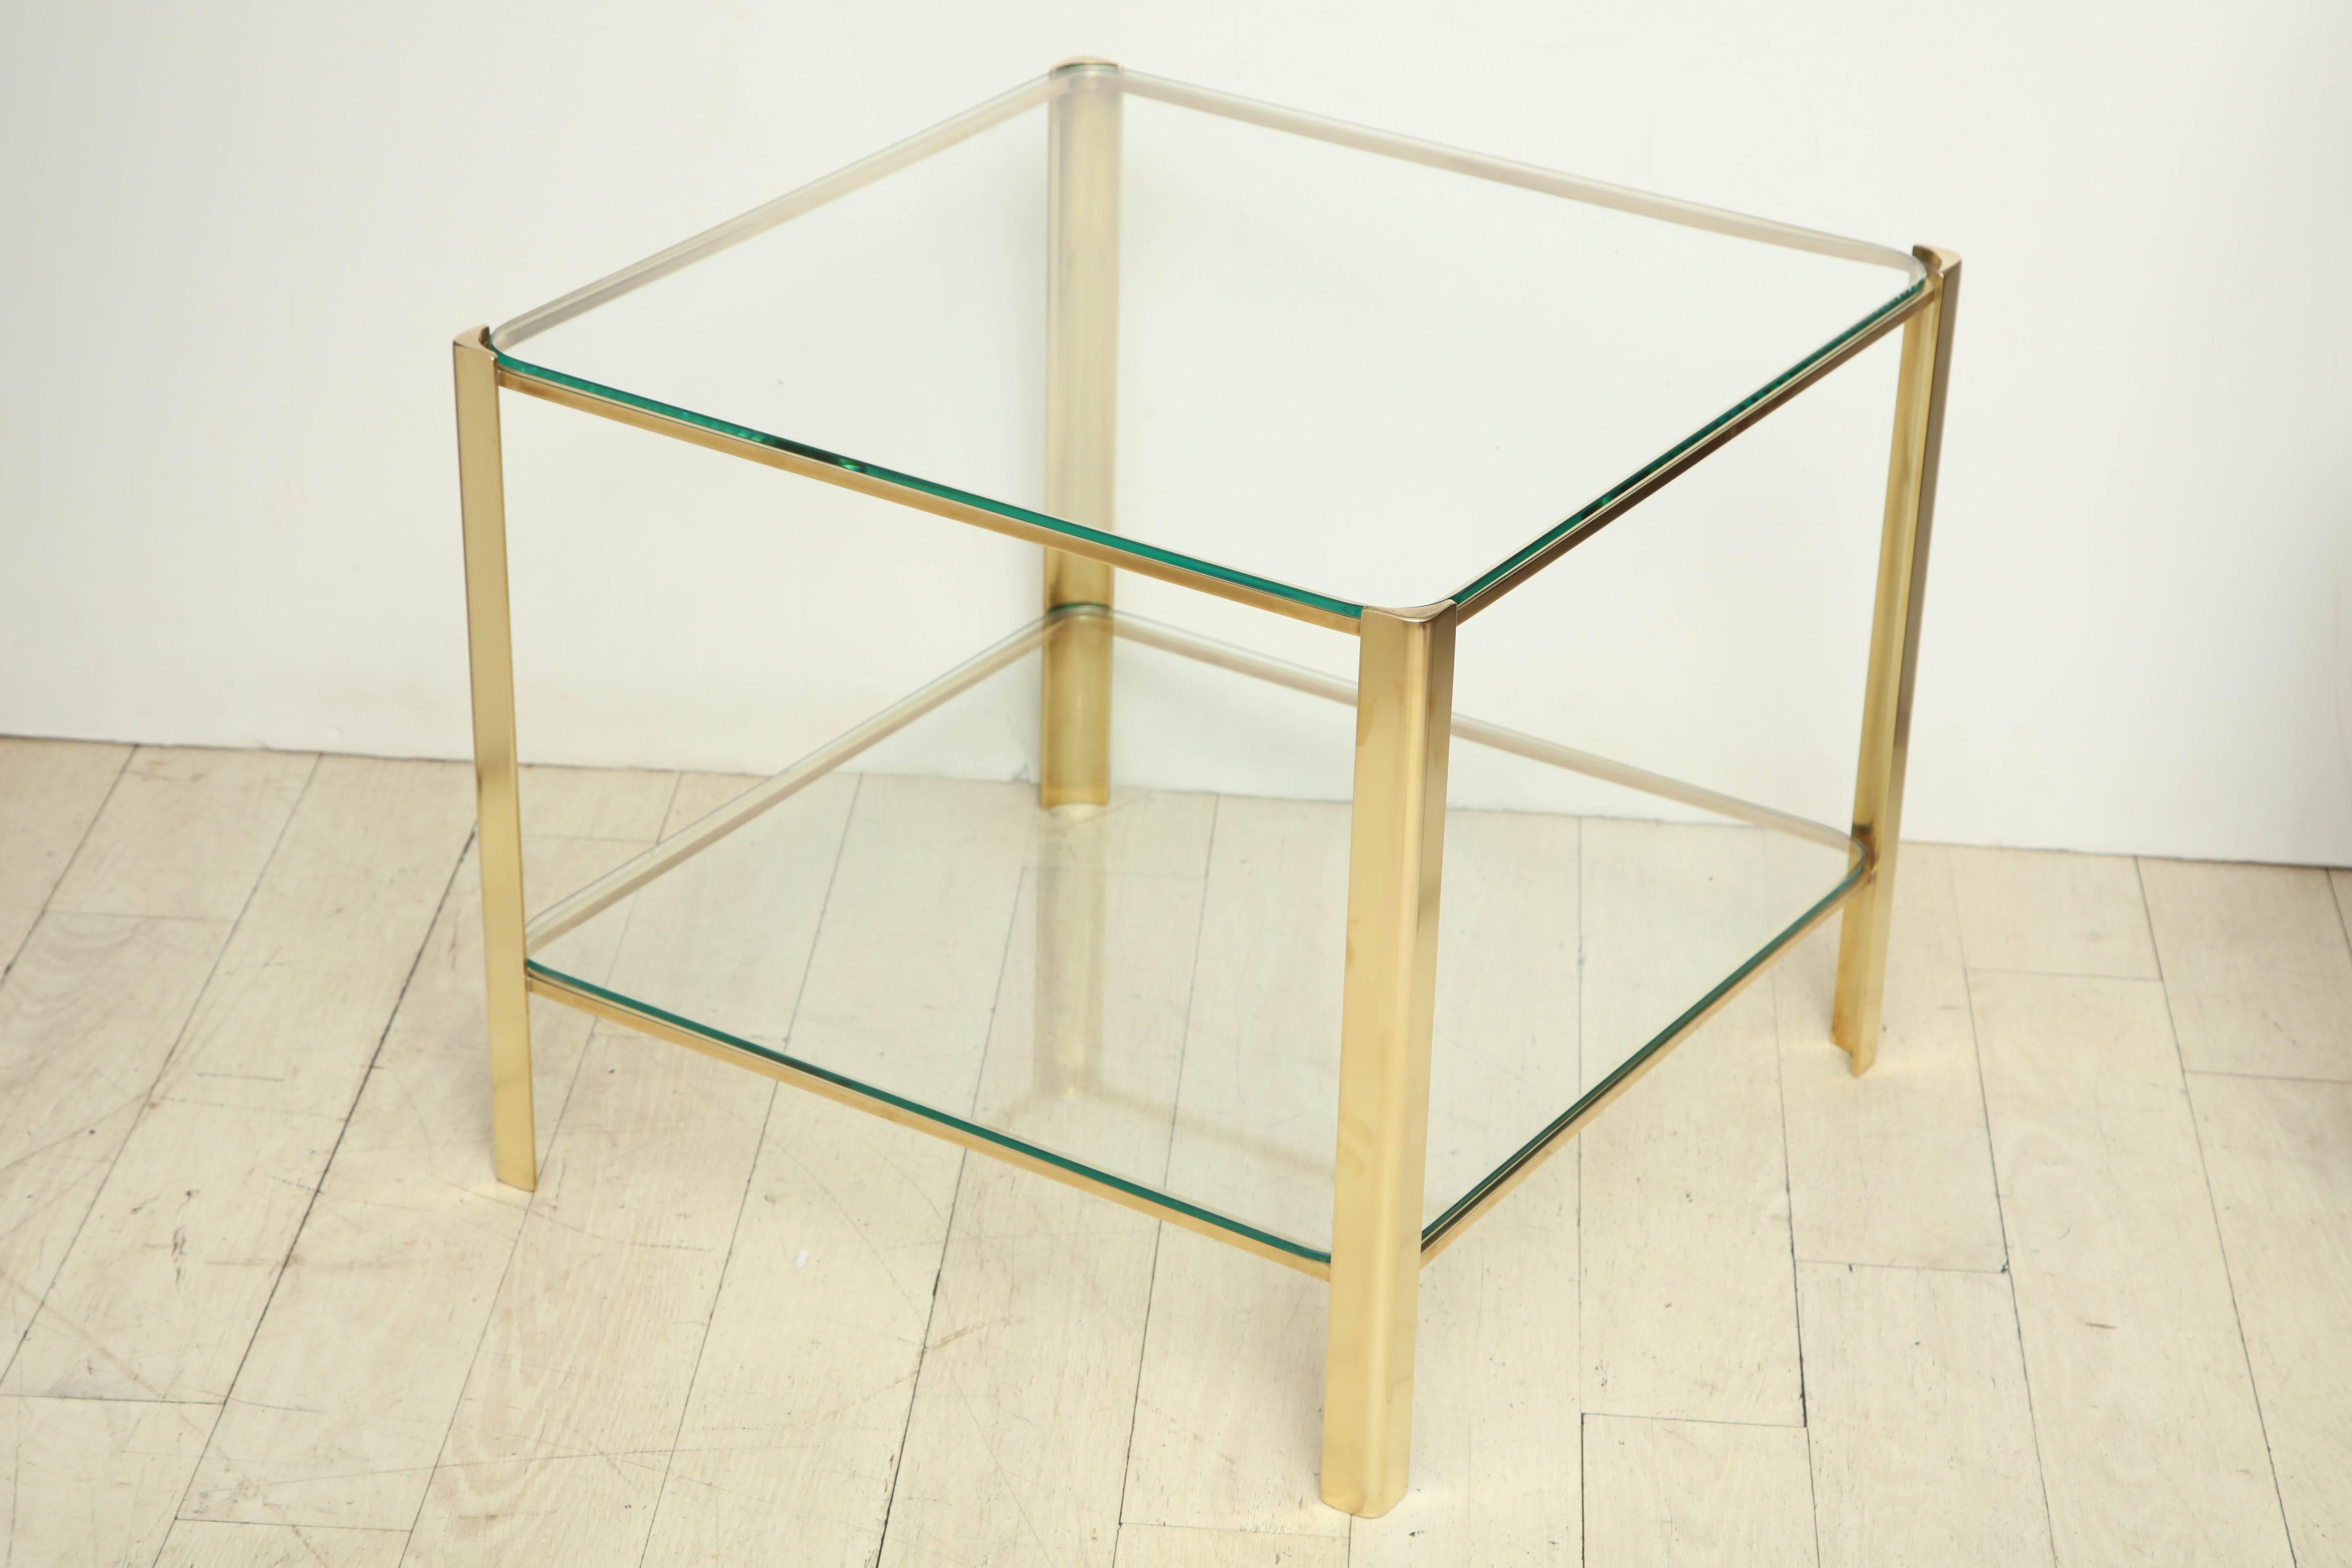 Square brass two-tiered table with rounded corners by Malabert, signed.



Available to see in our NYC Showroom 
BK Antiques
306 East 61st St. 2nd fl.
New York, NY 10065